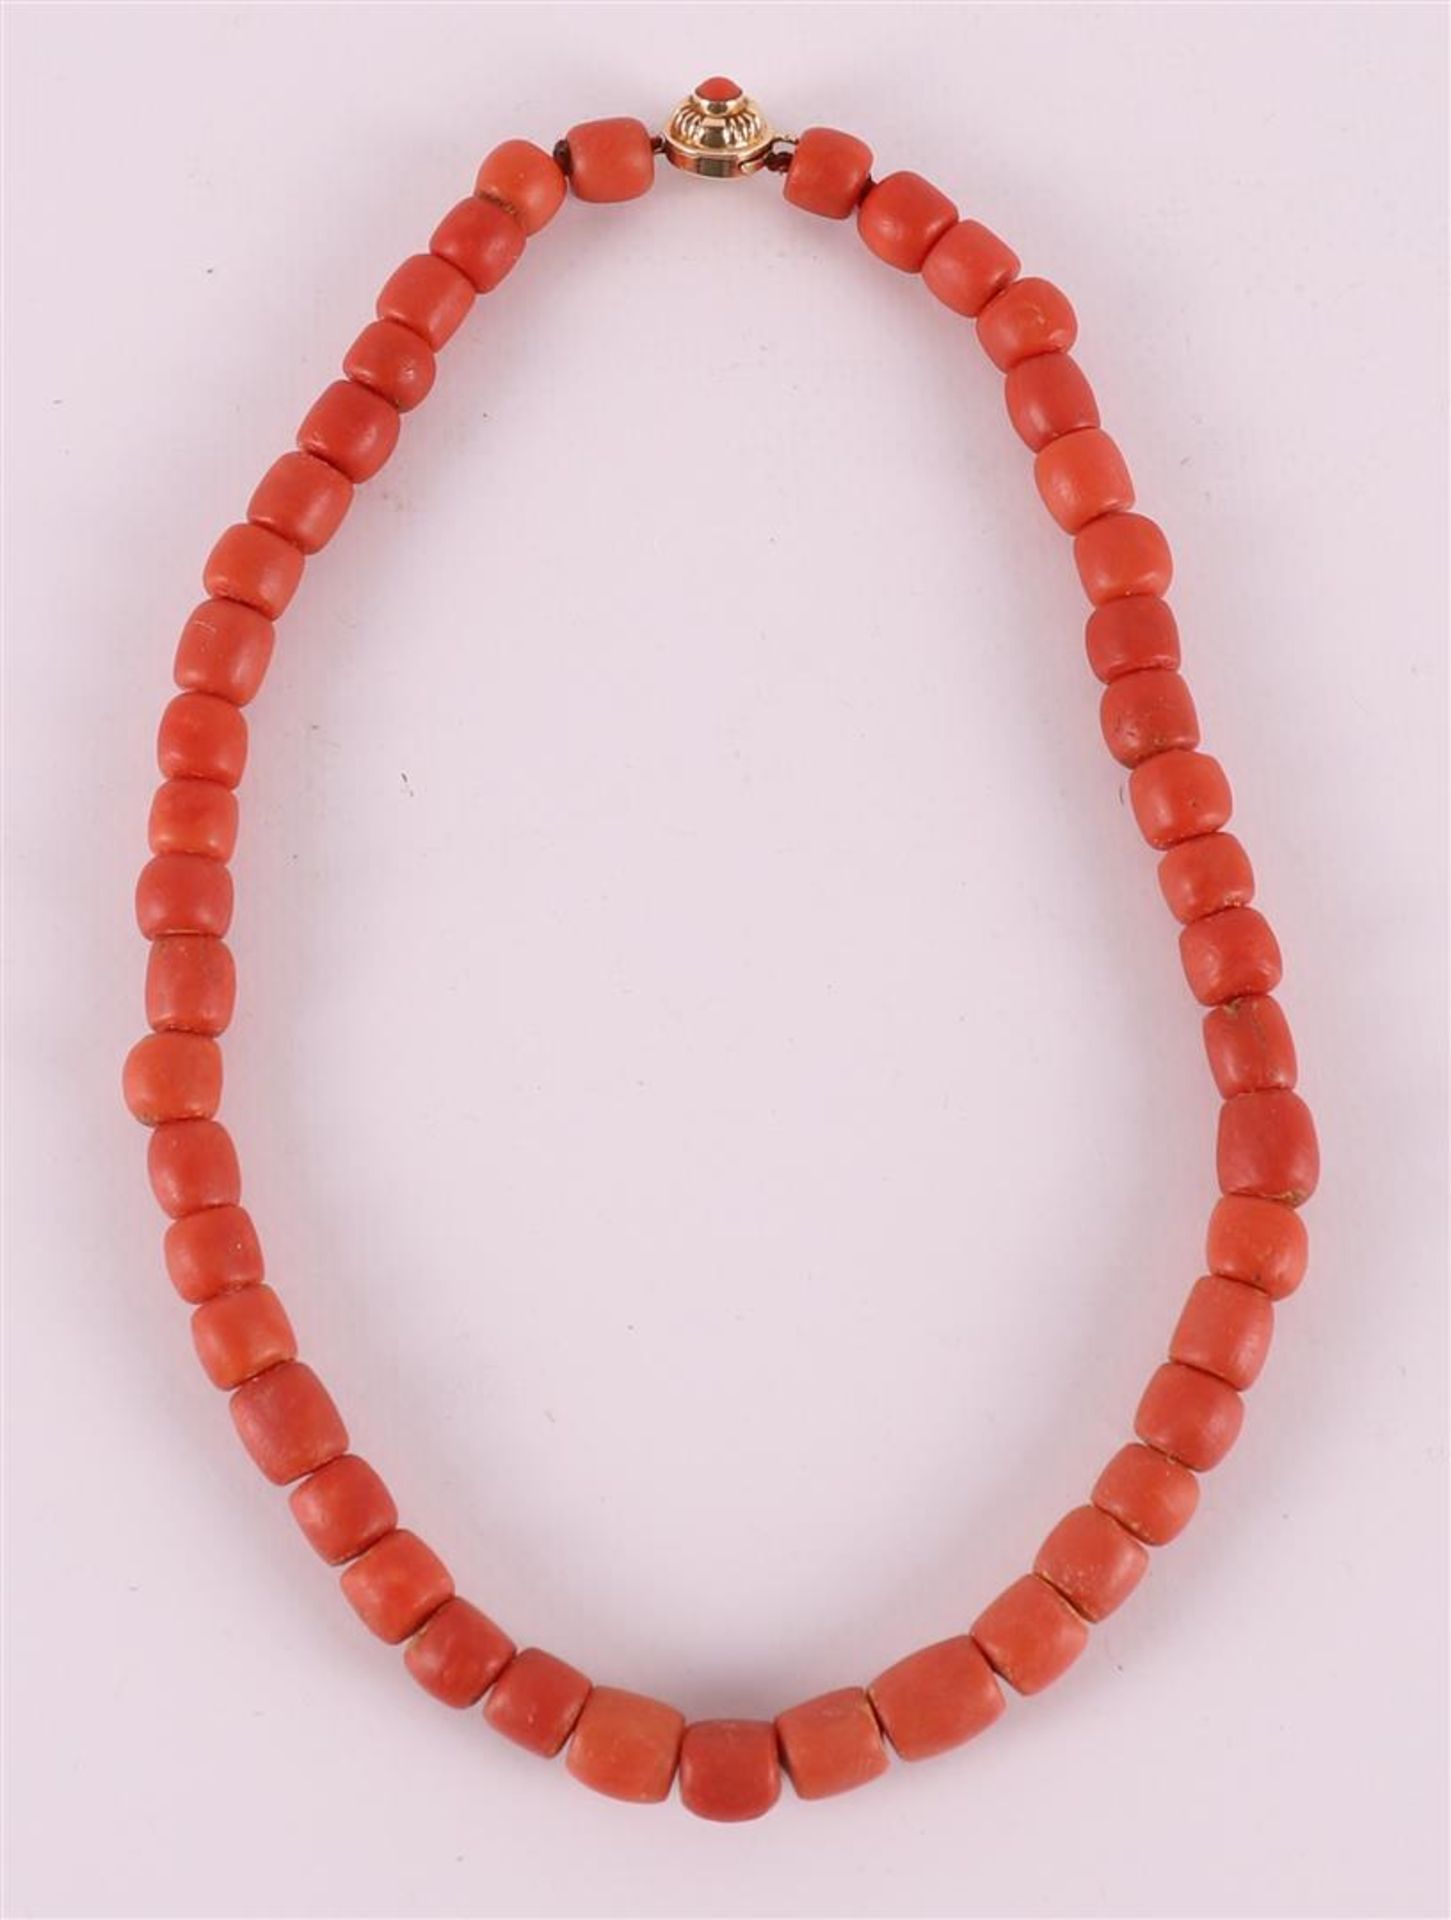 A single-row necklace of cheese-shaped red coral, late 19th century. On 14 kt 585/1000 yellow gold